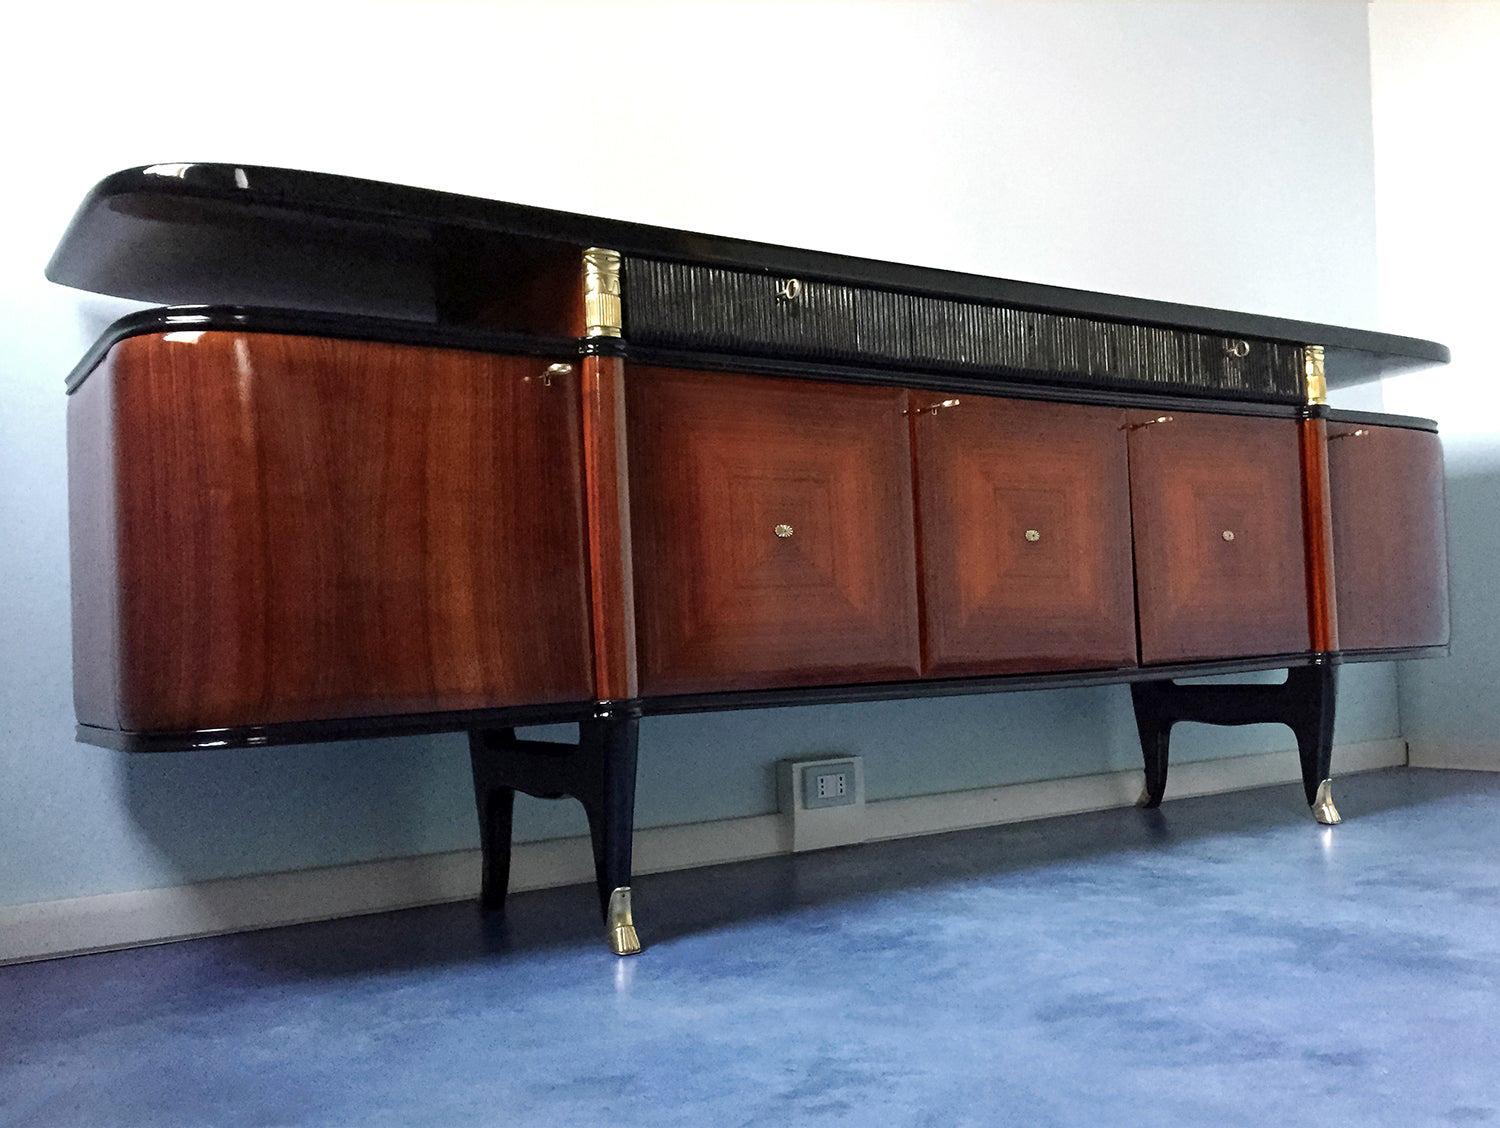 Stunning Italian Buffet or Sideboard by Paolo Buffa, 1950s.
The cabinet is equipped with three drawers reeded and five doors, it's decorated headed with gilt bronze mounts and supported on tapering legs terminating in sabots.
It's in very good